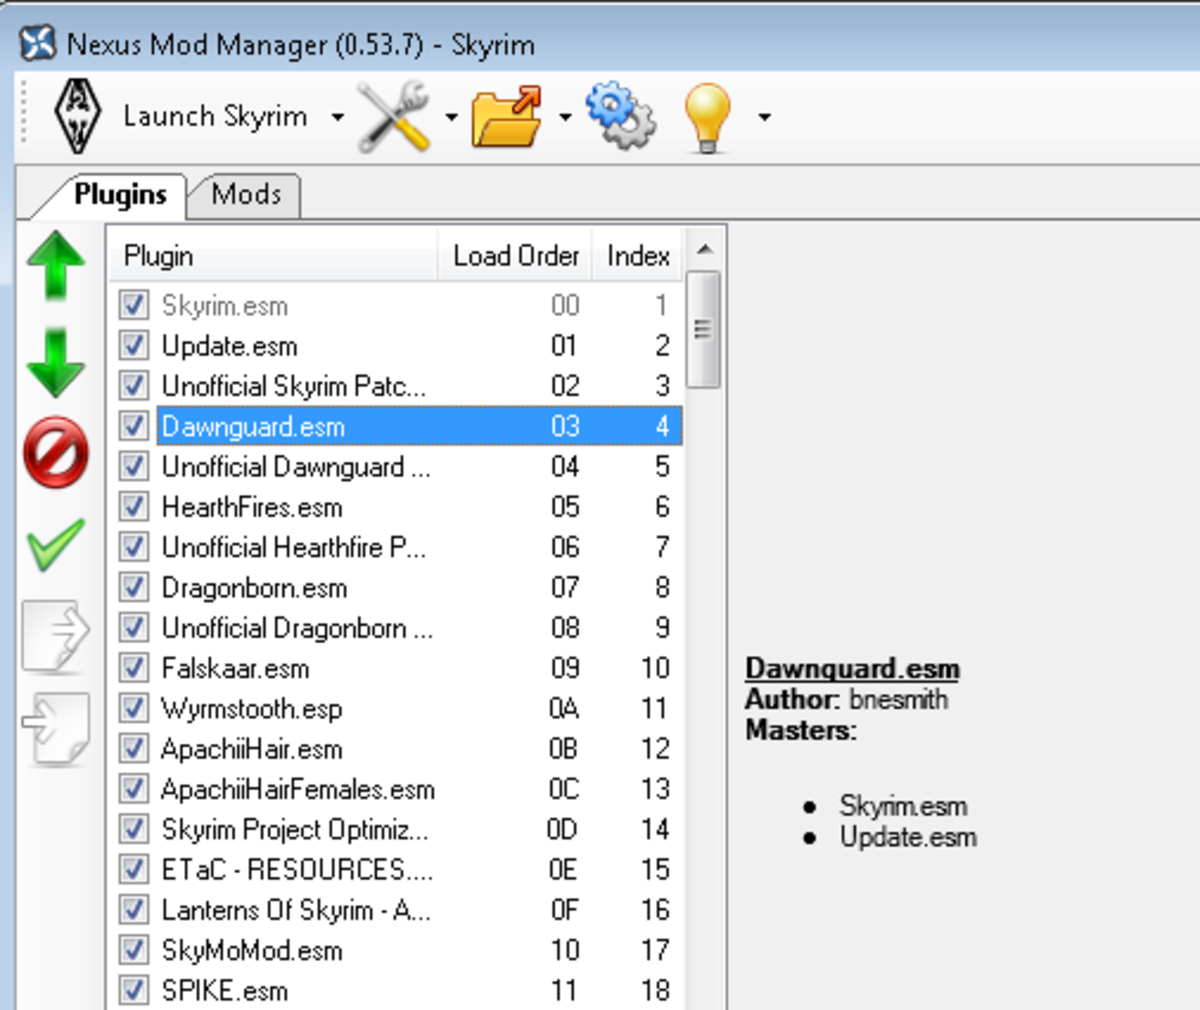 How to manage the plugin load order using Nexus Mod Manager.